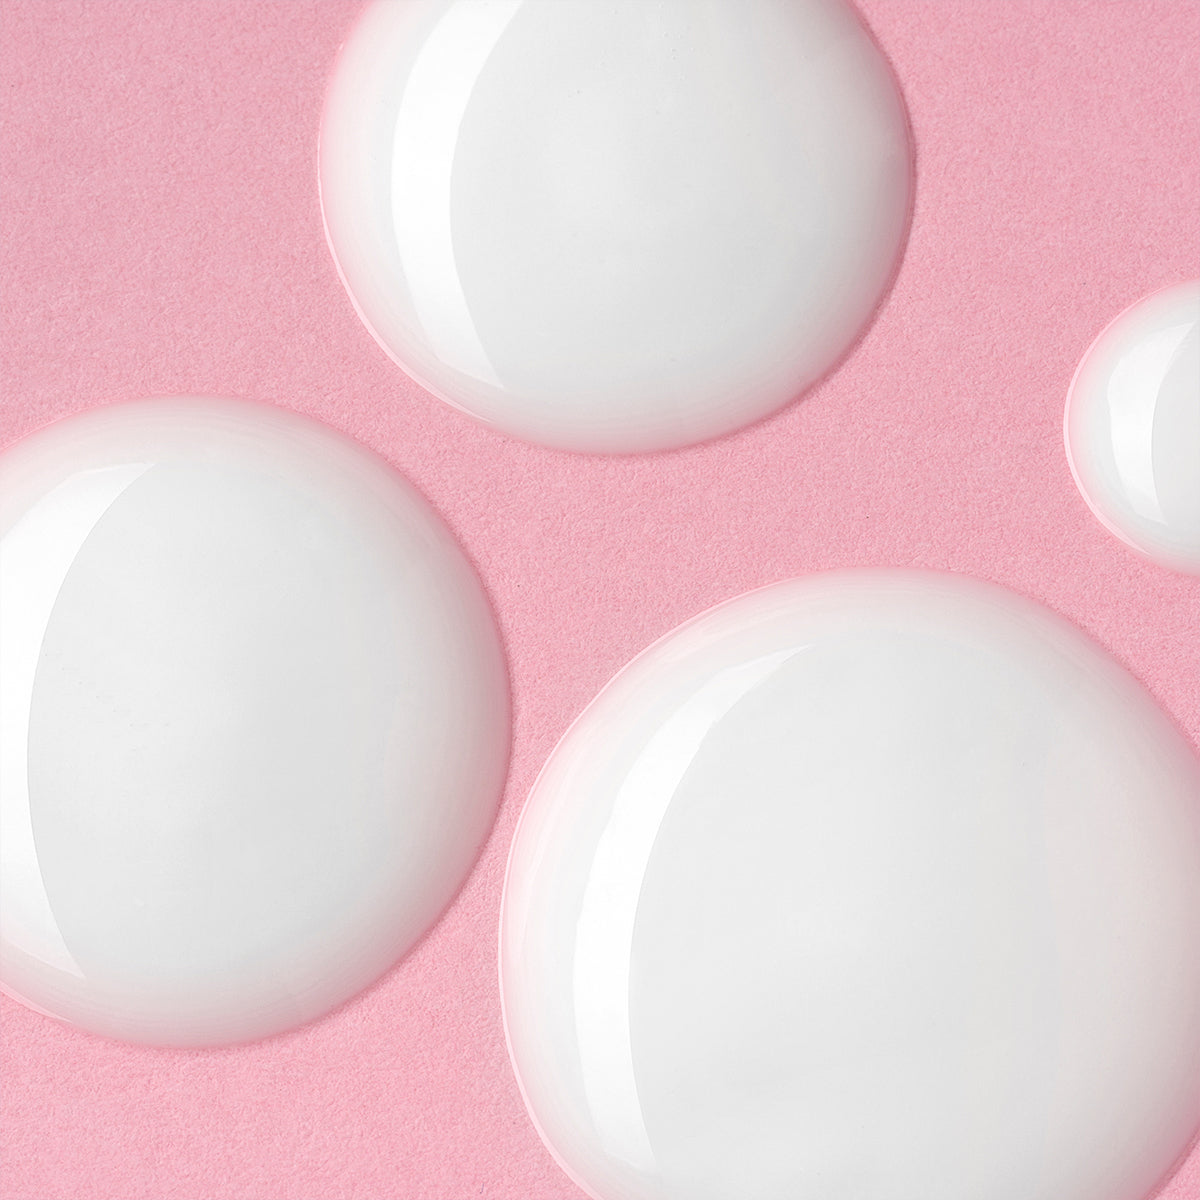 A cluster of white circles on a pink background, reminiscent of the Iridescent Light Serum Luminous Rose by Alteya Organics, a skin hydrating and moisturizing serum.